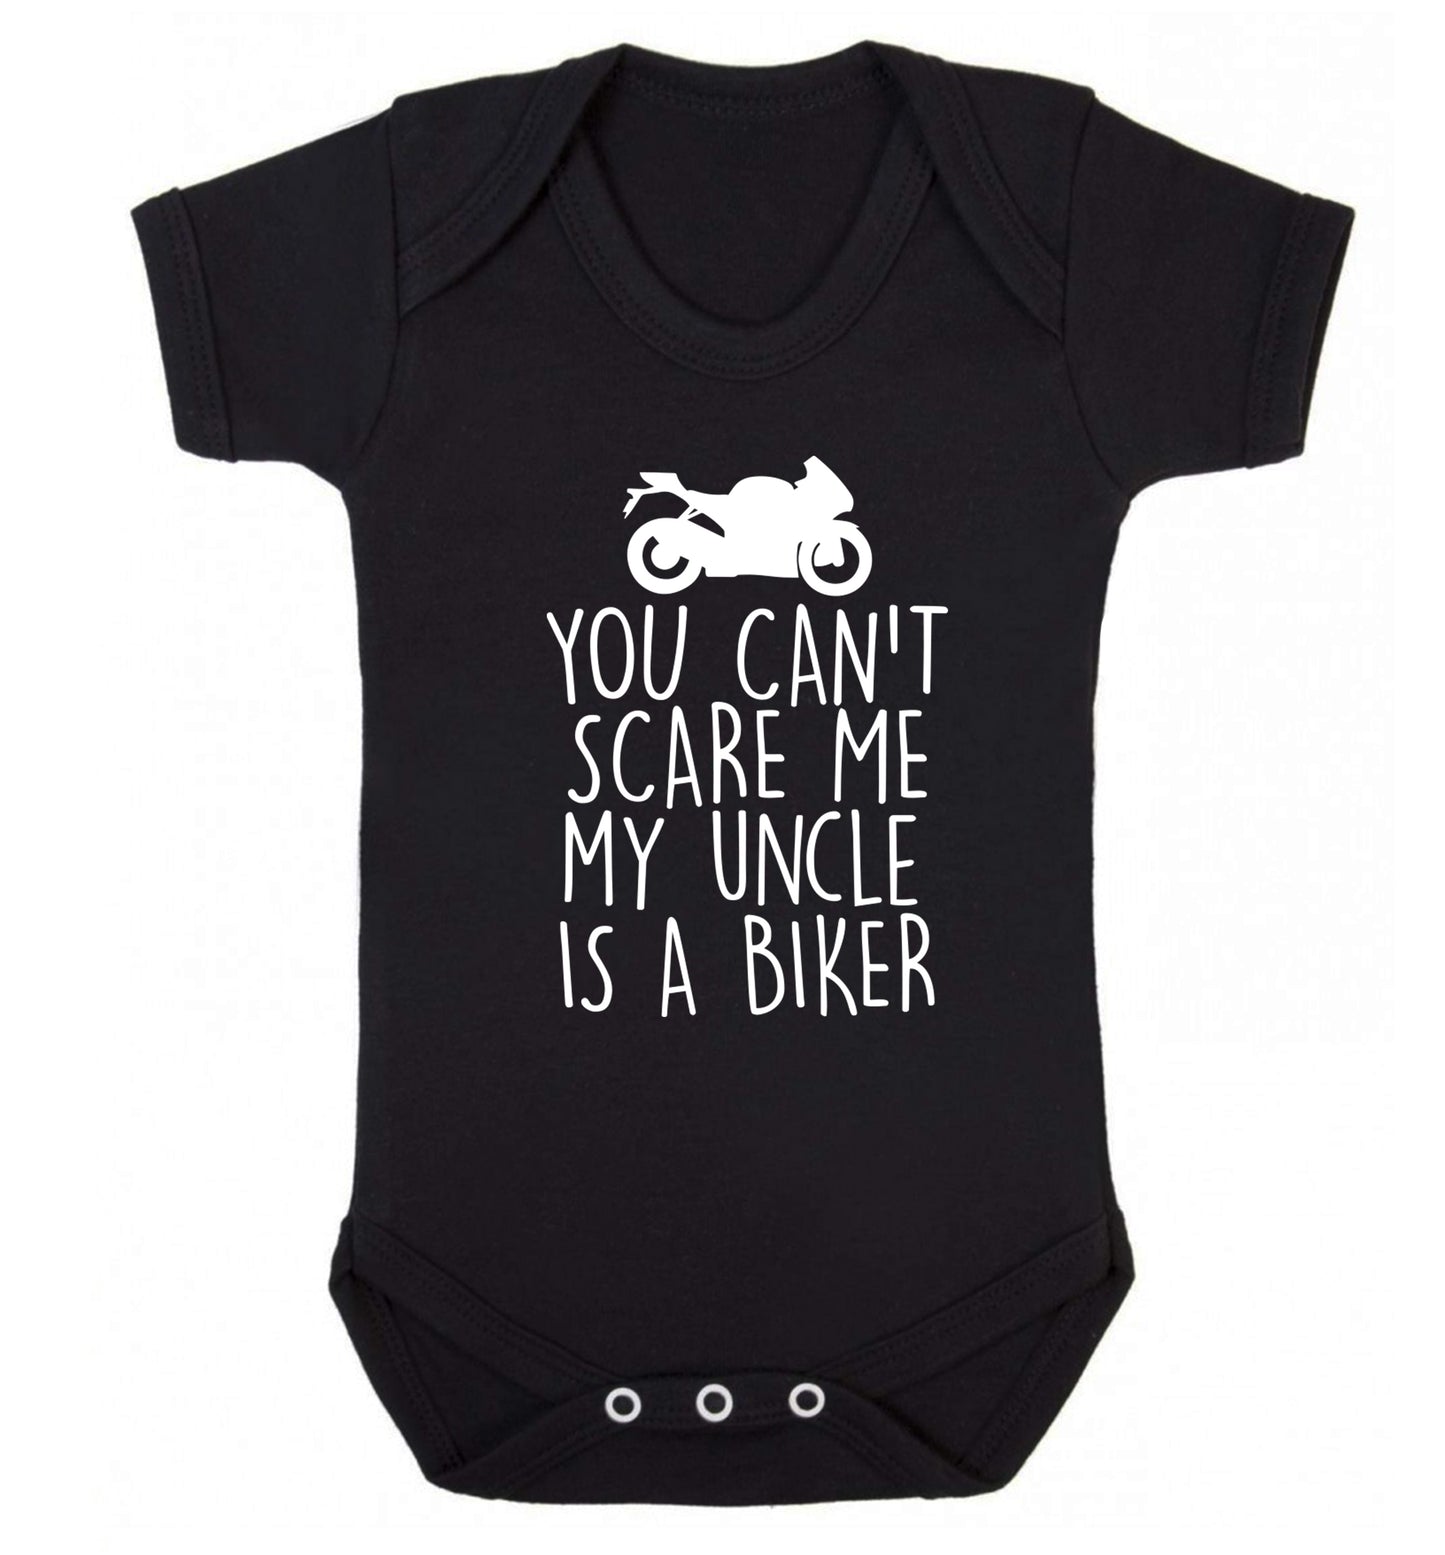 You can't scare me my uncle is a biker Baby Vest black 18-24 months